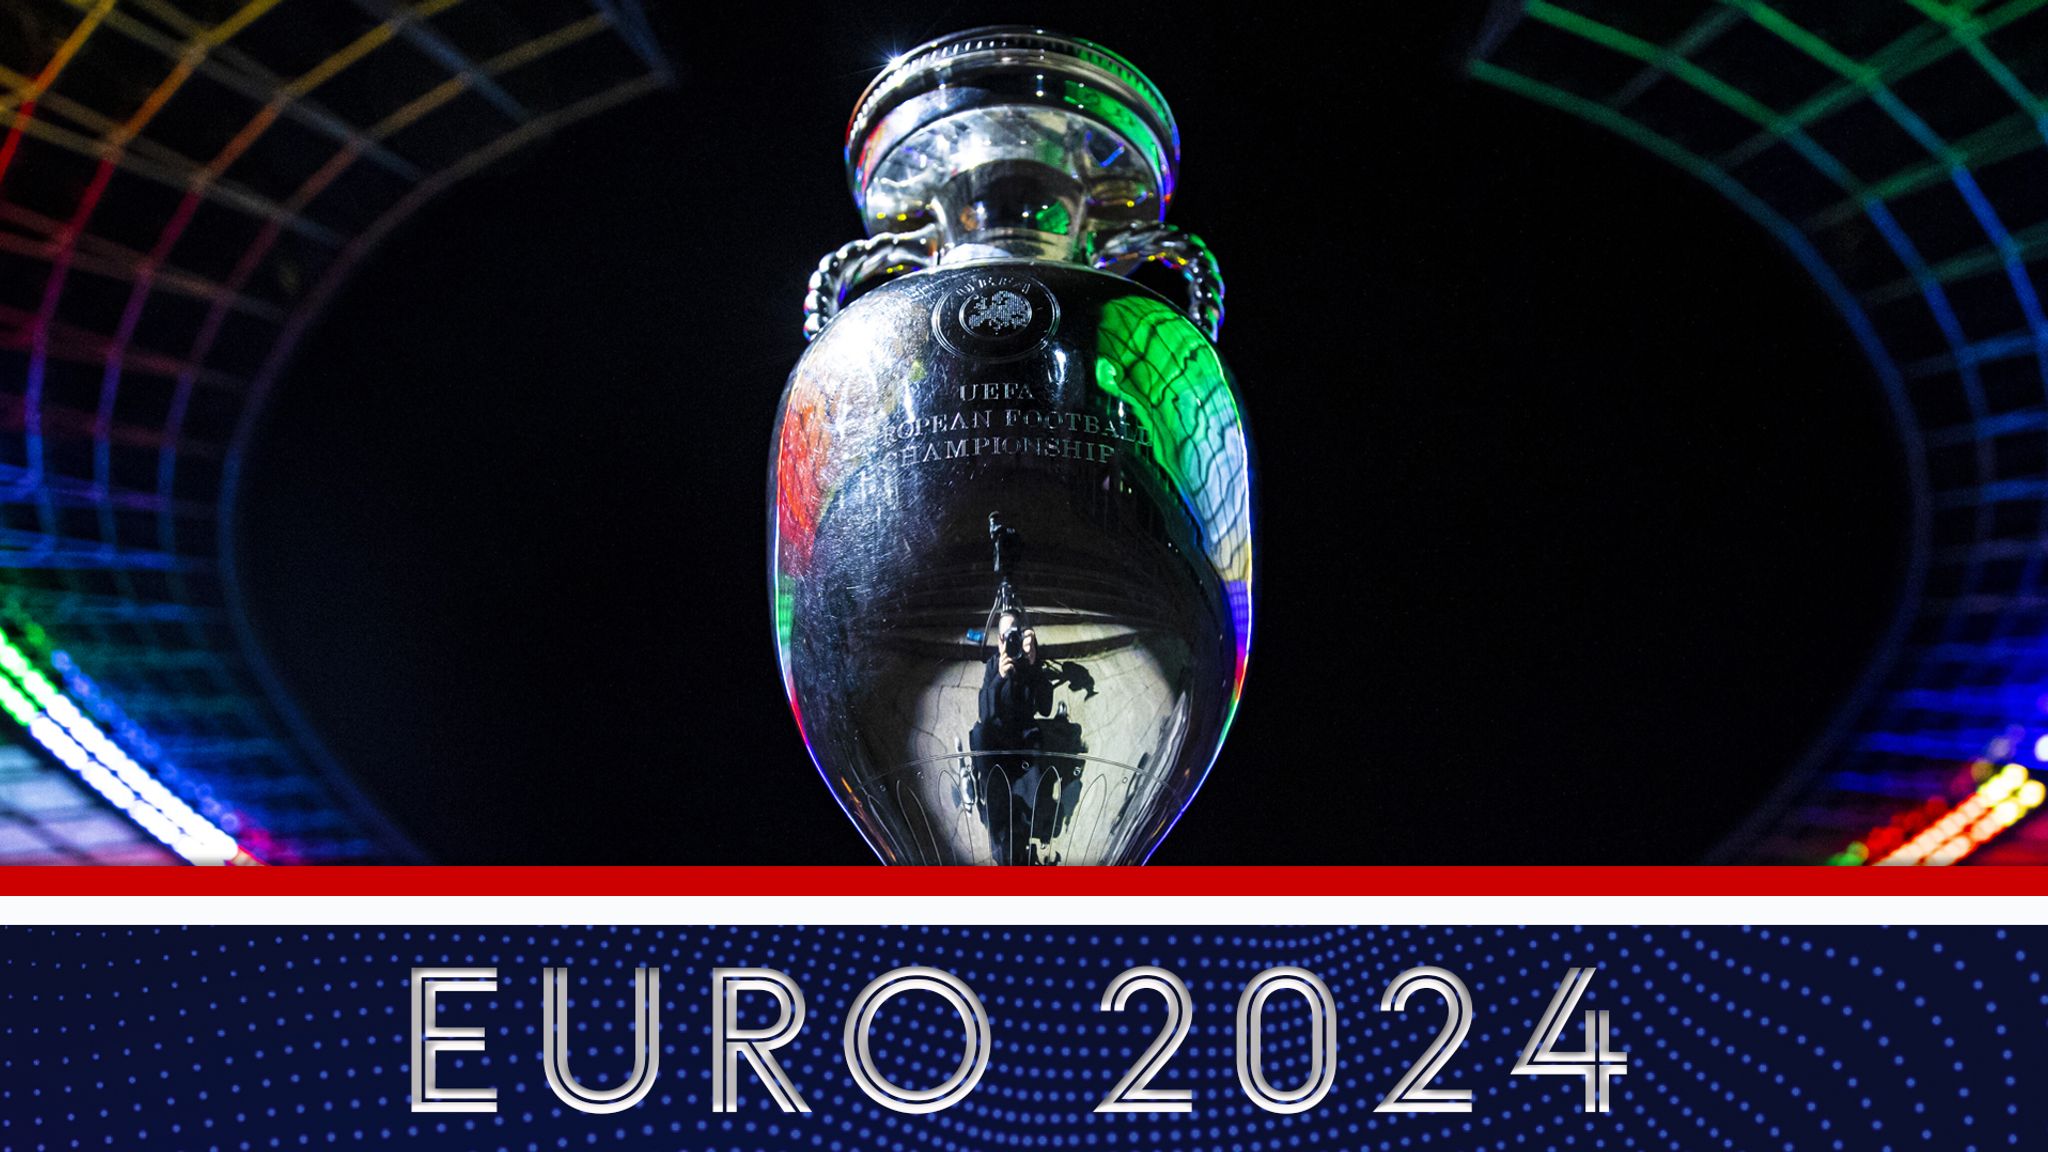 Euro 2024 fixtures, schedule, teams, venues All you need to know about